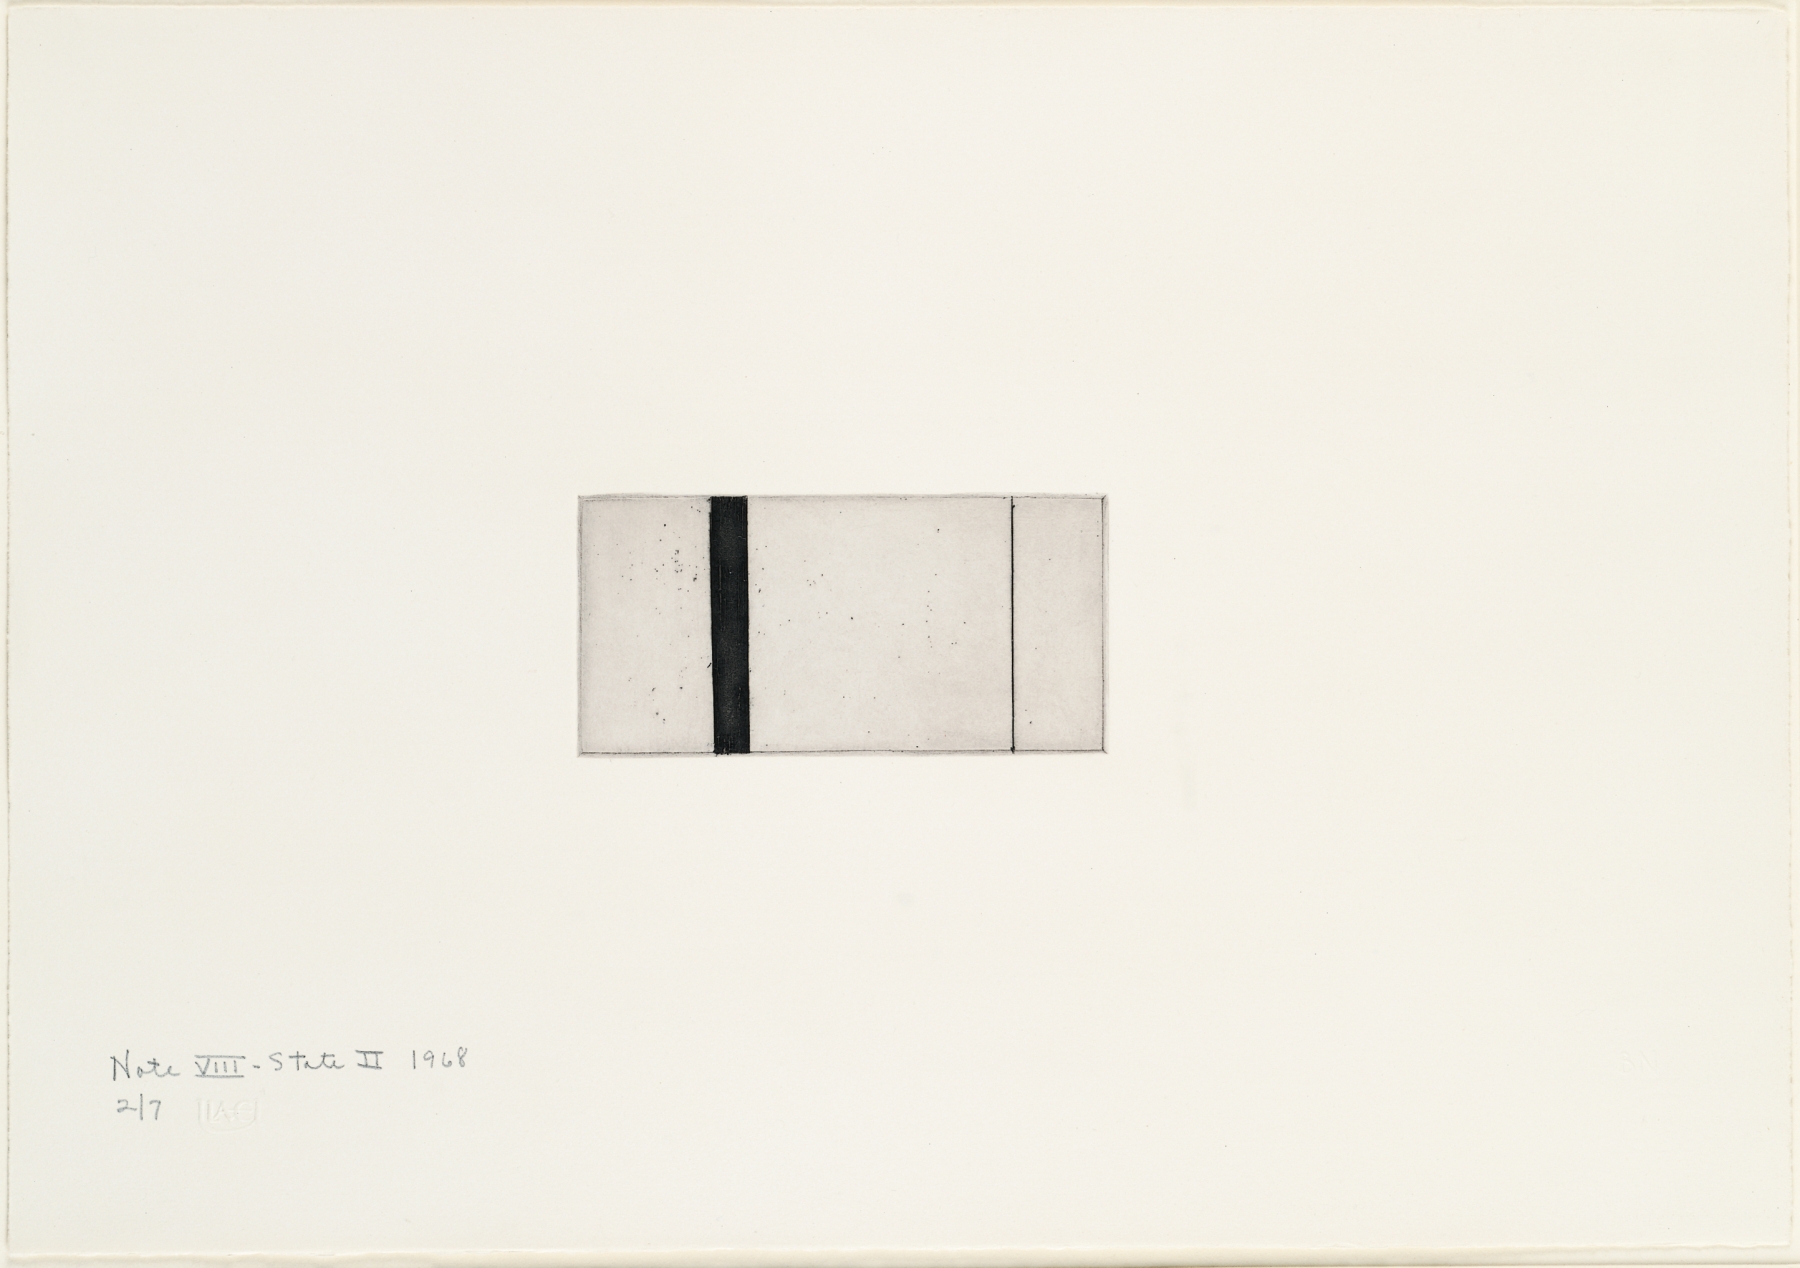 Barnett Newman, Note VIII (State II), 1968. Etching, printed in black on Italia white wove paper, 2 15/16 x 5 15/16 inches, Plate; 14 x 19 7/8 inches, Sheet. Edition of 7. Private Collection.